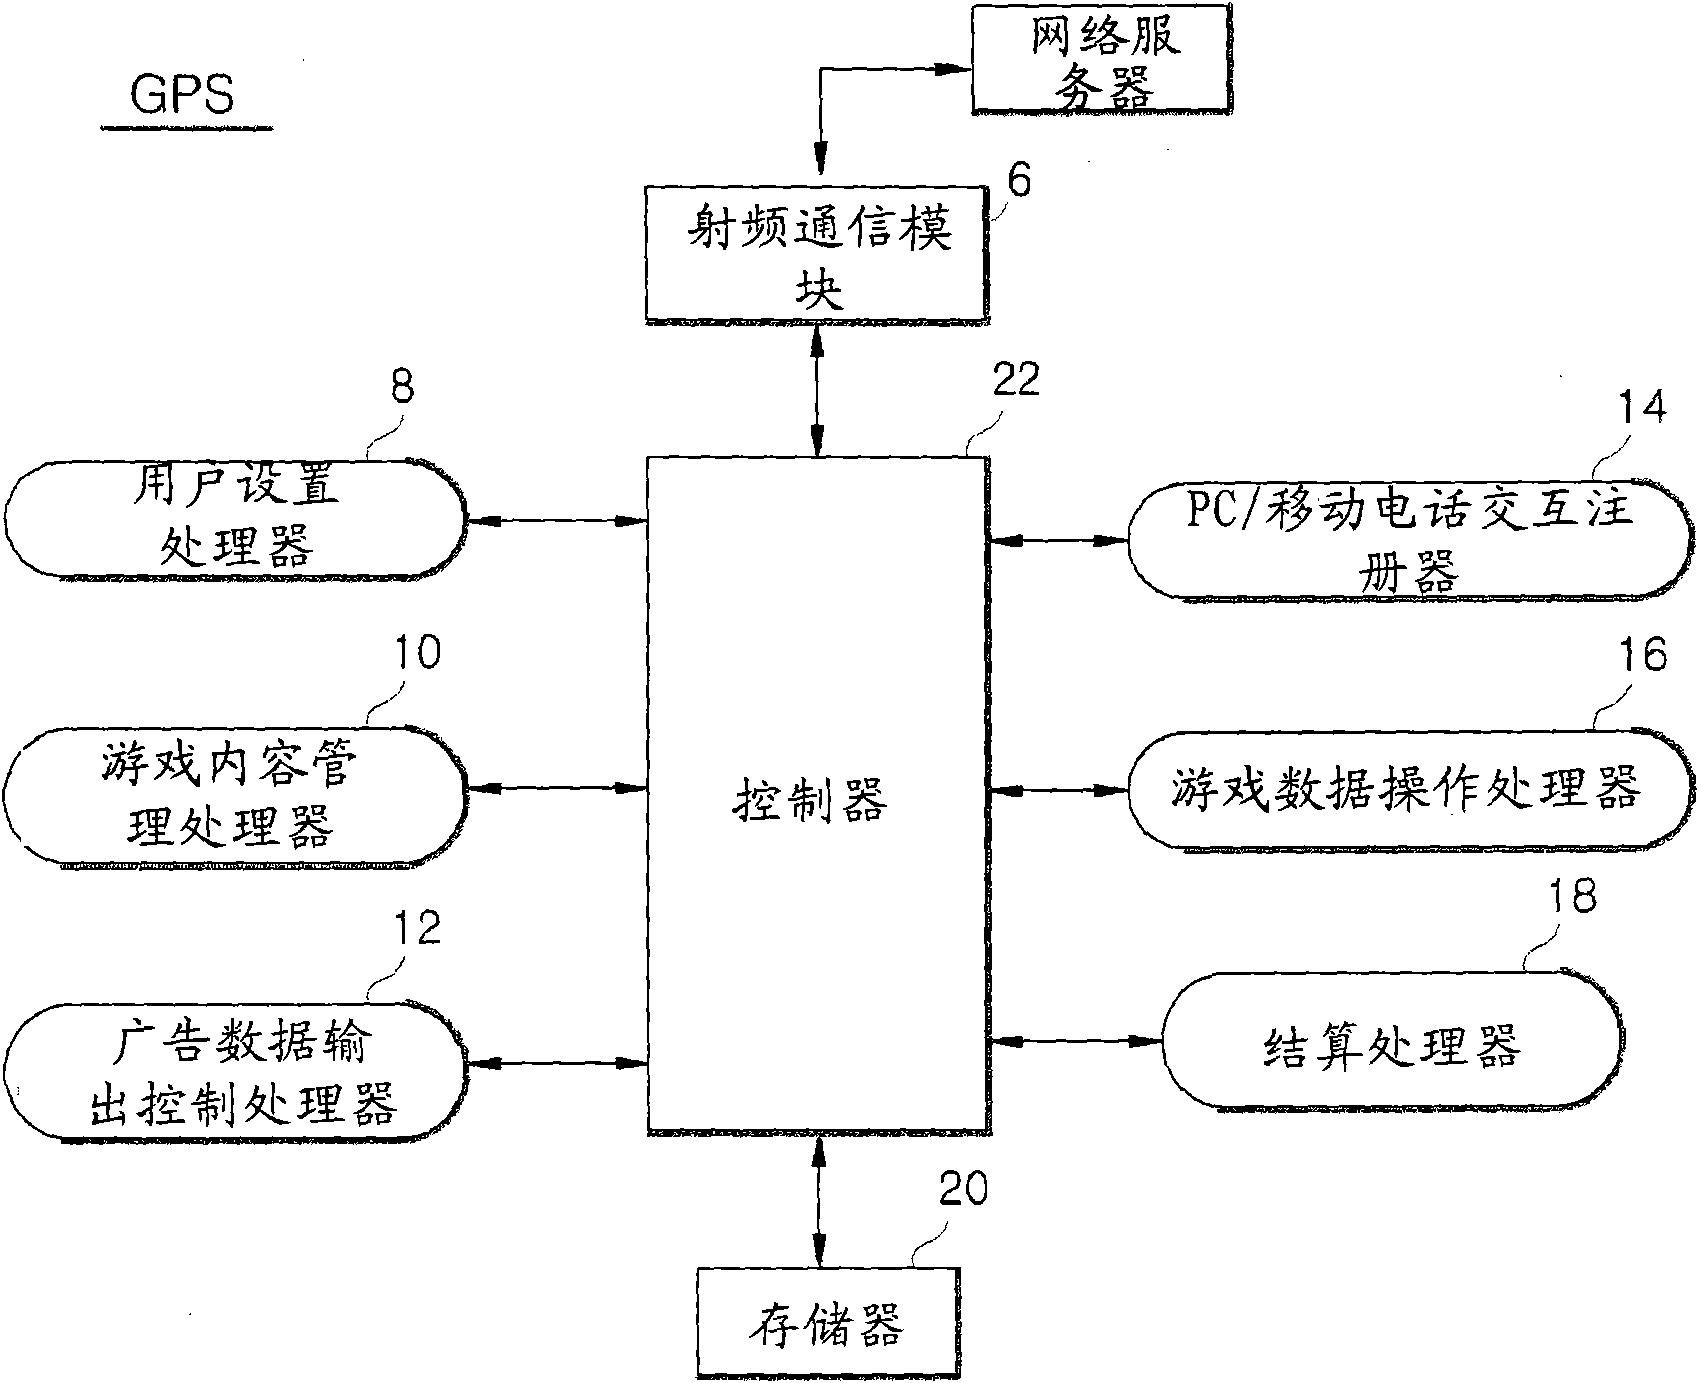 Game system and method in combination with mobile phones and a game console